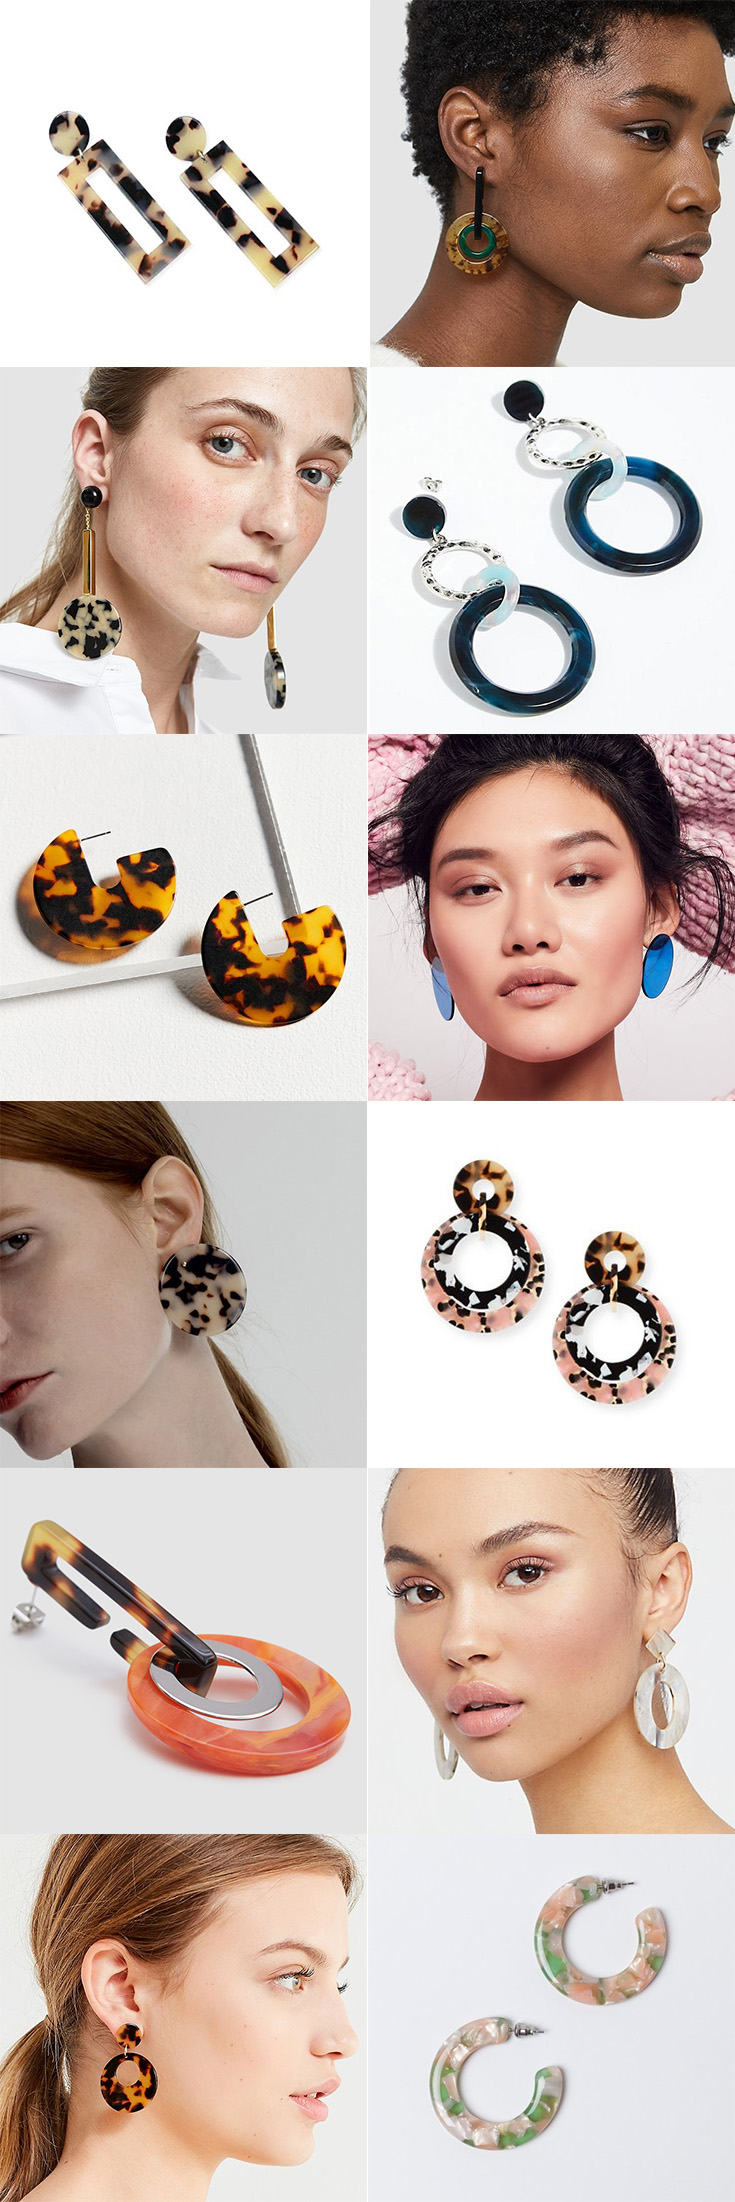 Spring jewelry trend: Acrylic statement earrings